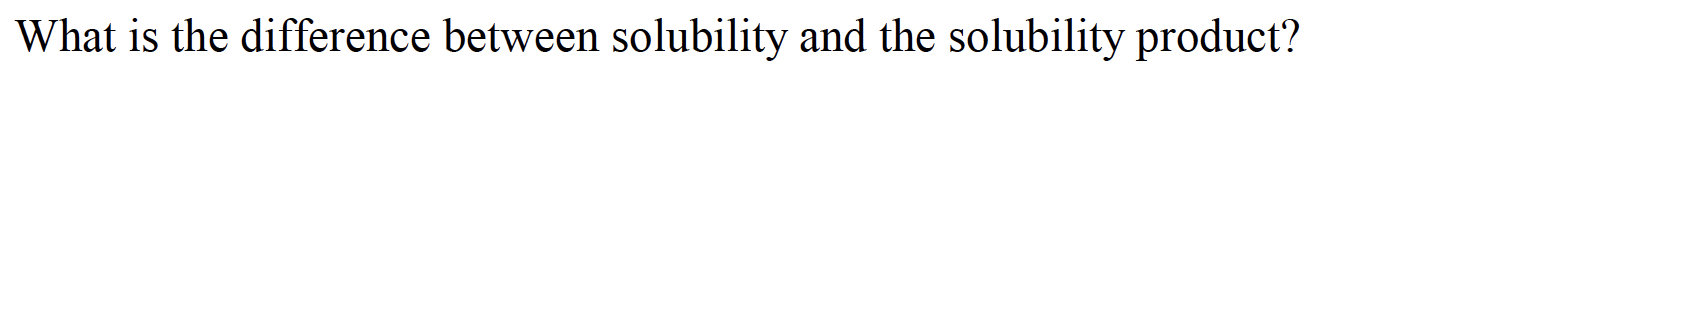 What is the difference between solubility and the solubility product?
